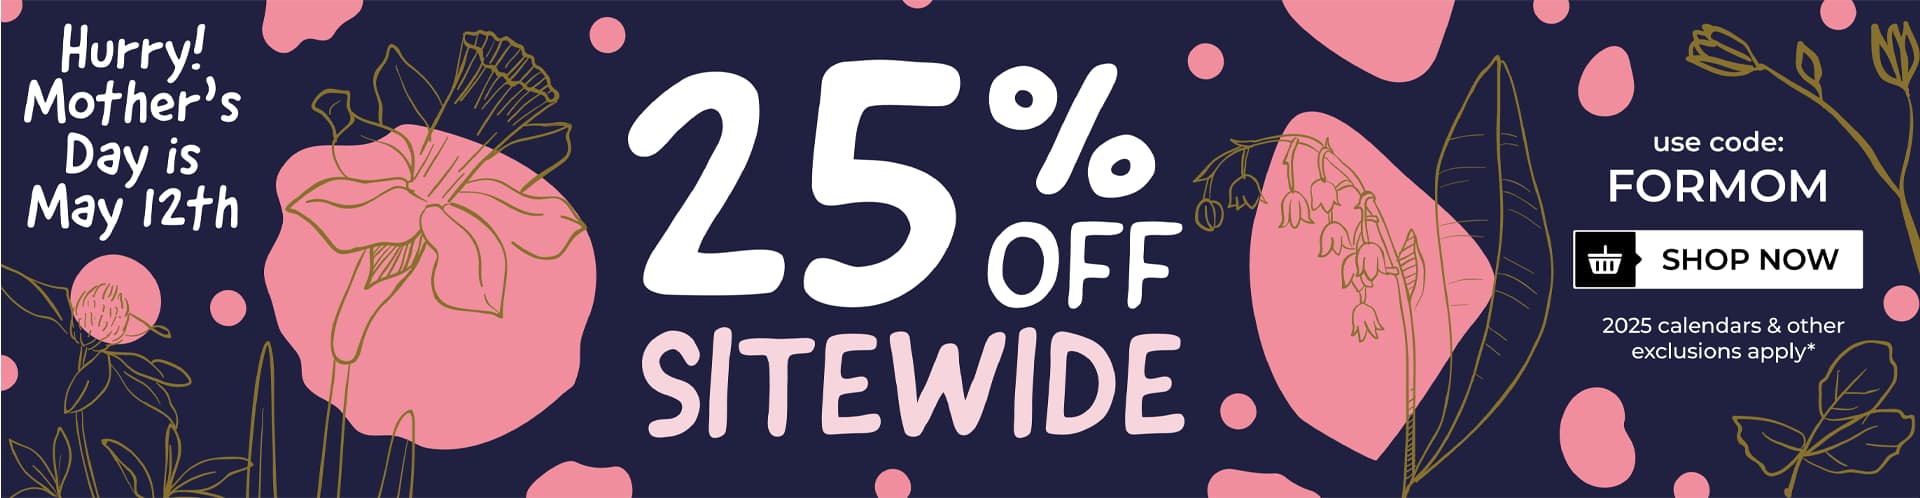 Mother's Day - 25% Off Sitewide